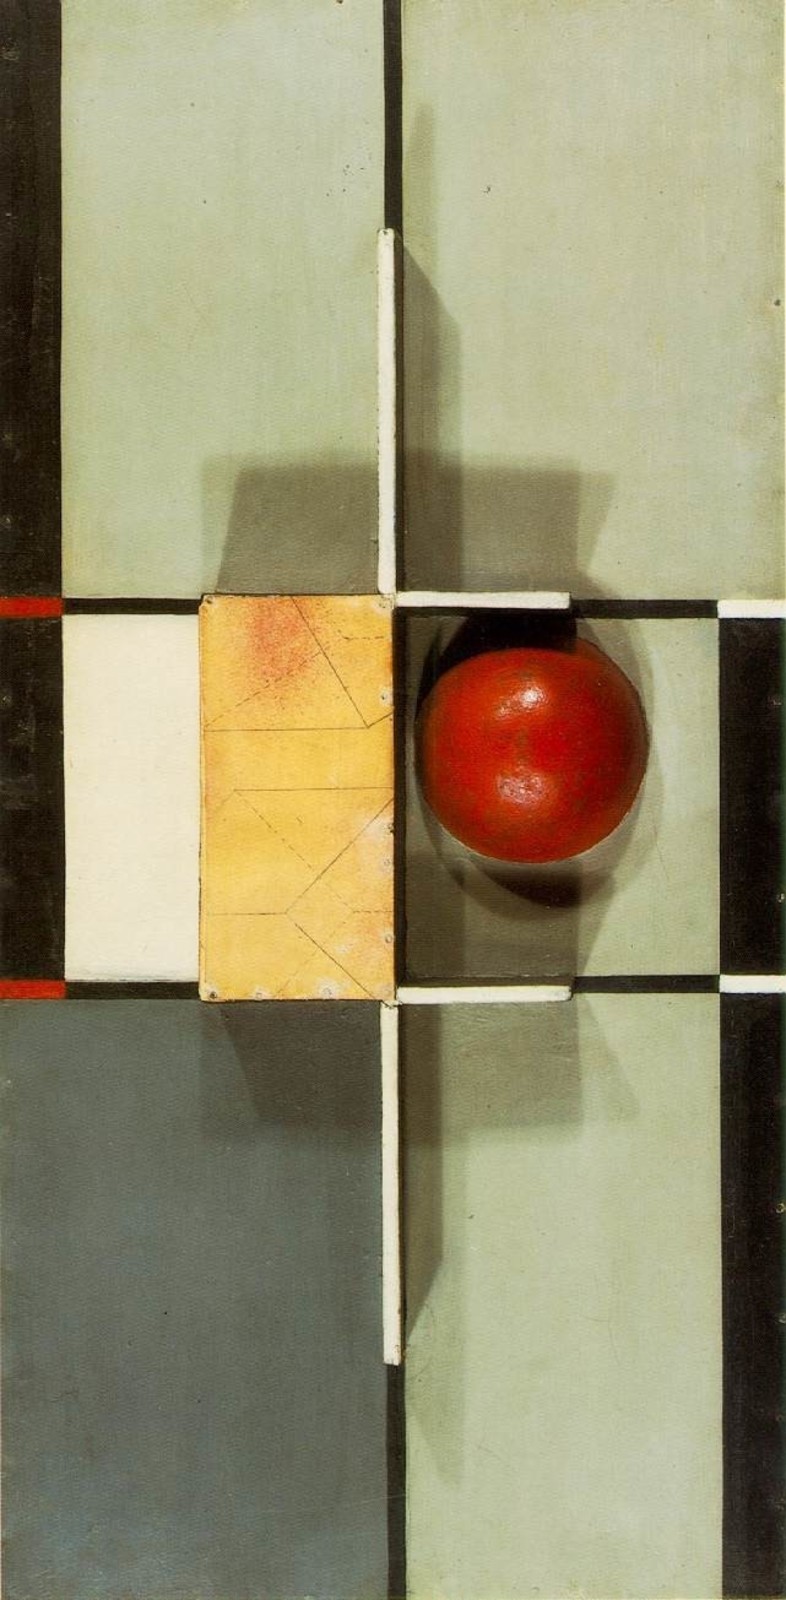 Kurt Schwitters. Relief with Cross and Sphere. 1924. Painted relief. 69 x 34.2 cm. Marlborough Fine Art (London, United Kingdom).